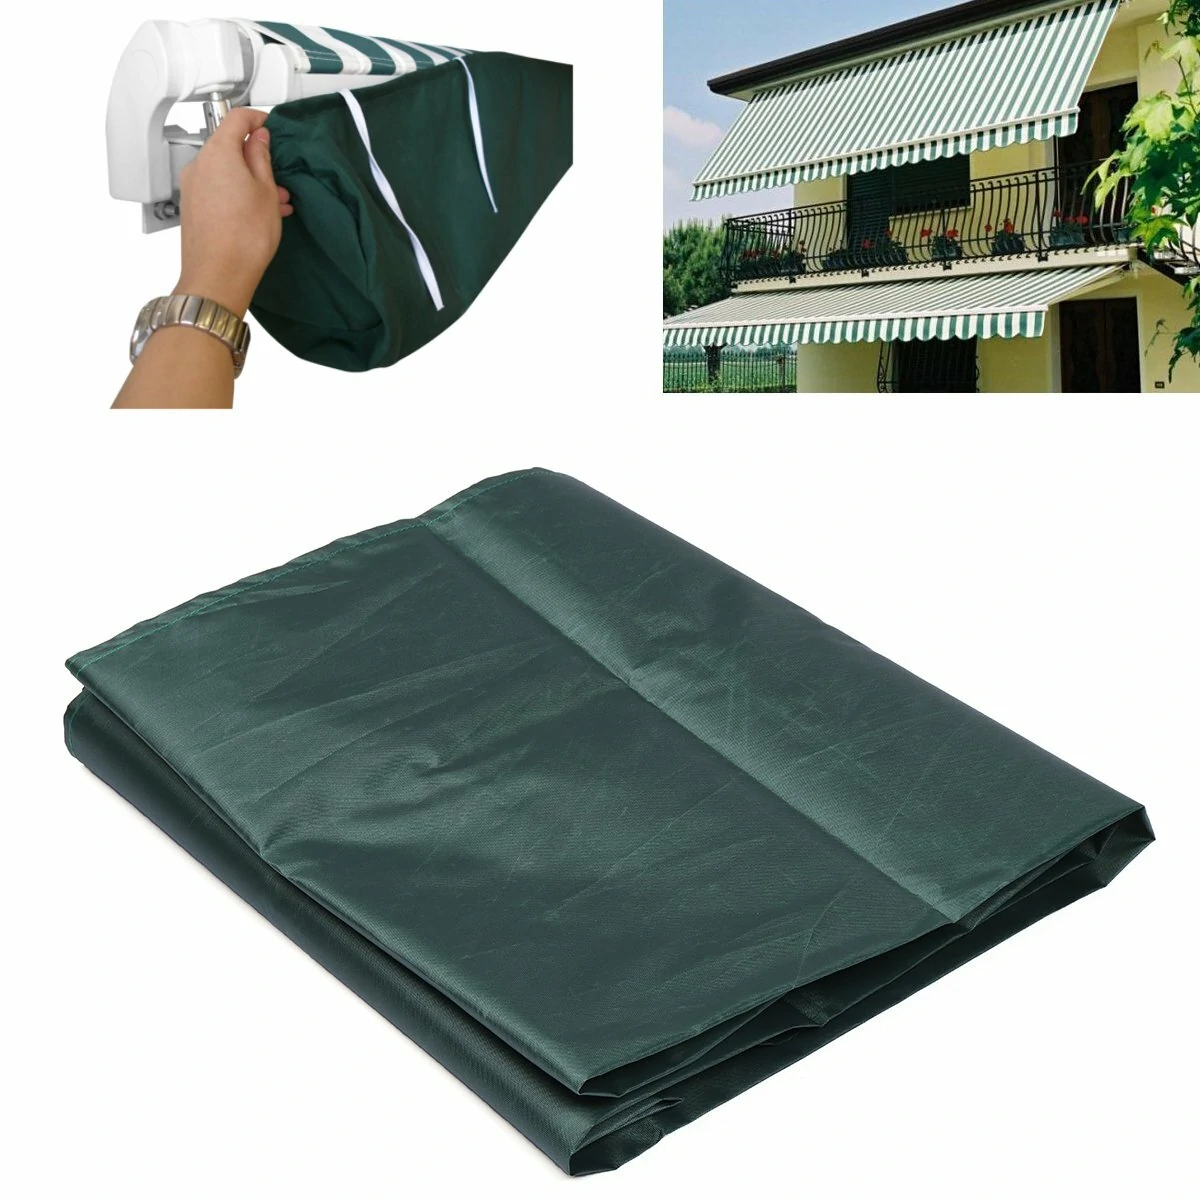 Oxford cloth patio awning storage bag outdoor sun canopy protector cover tent anti dust waterproof